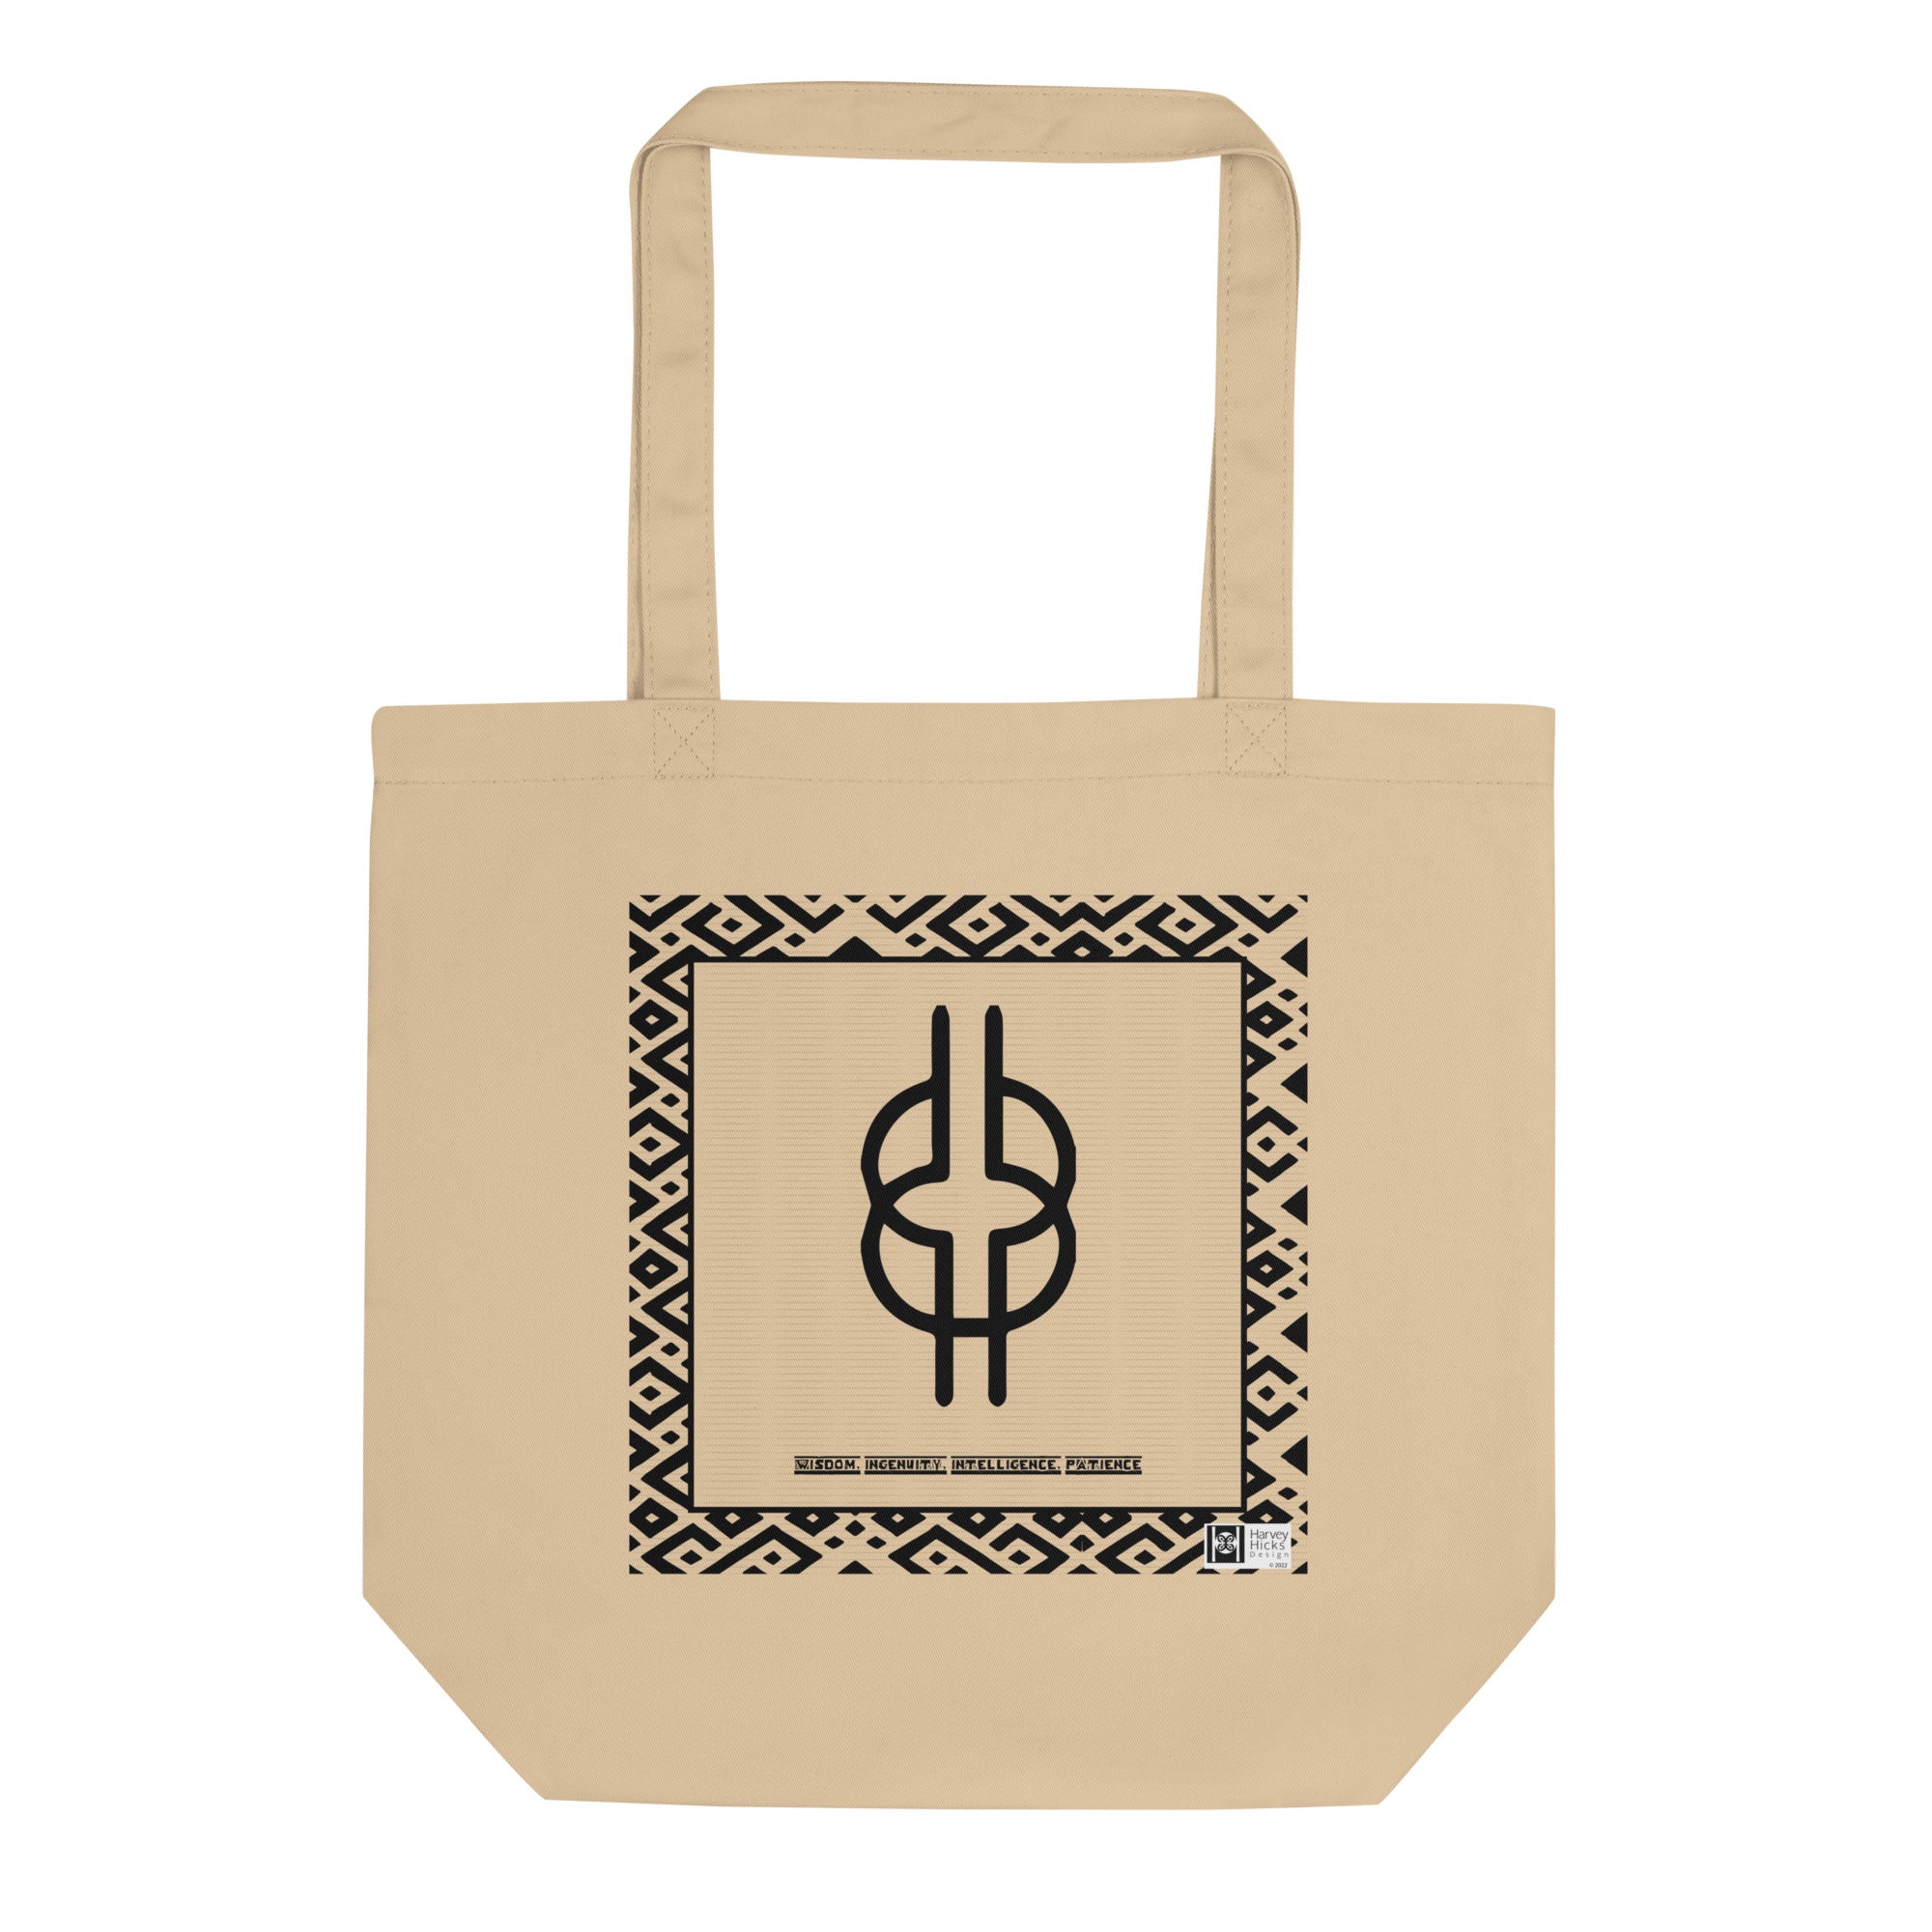 100% cotton Eco Tote Bag, featuring the Adinkra symbol for wisdom and ingenuity